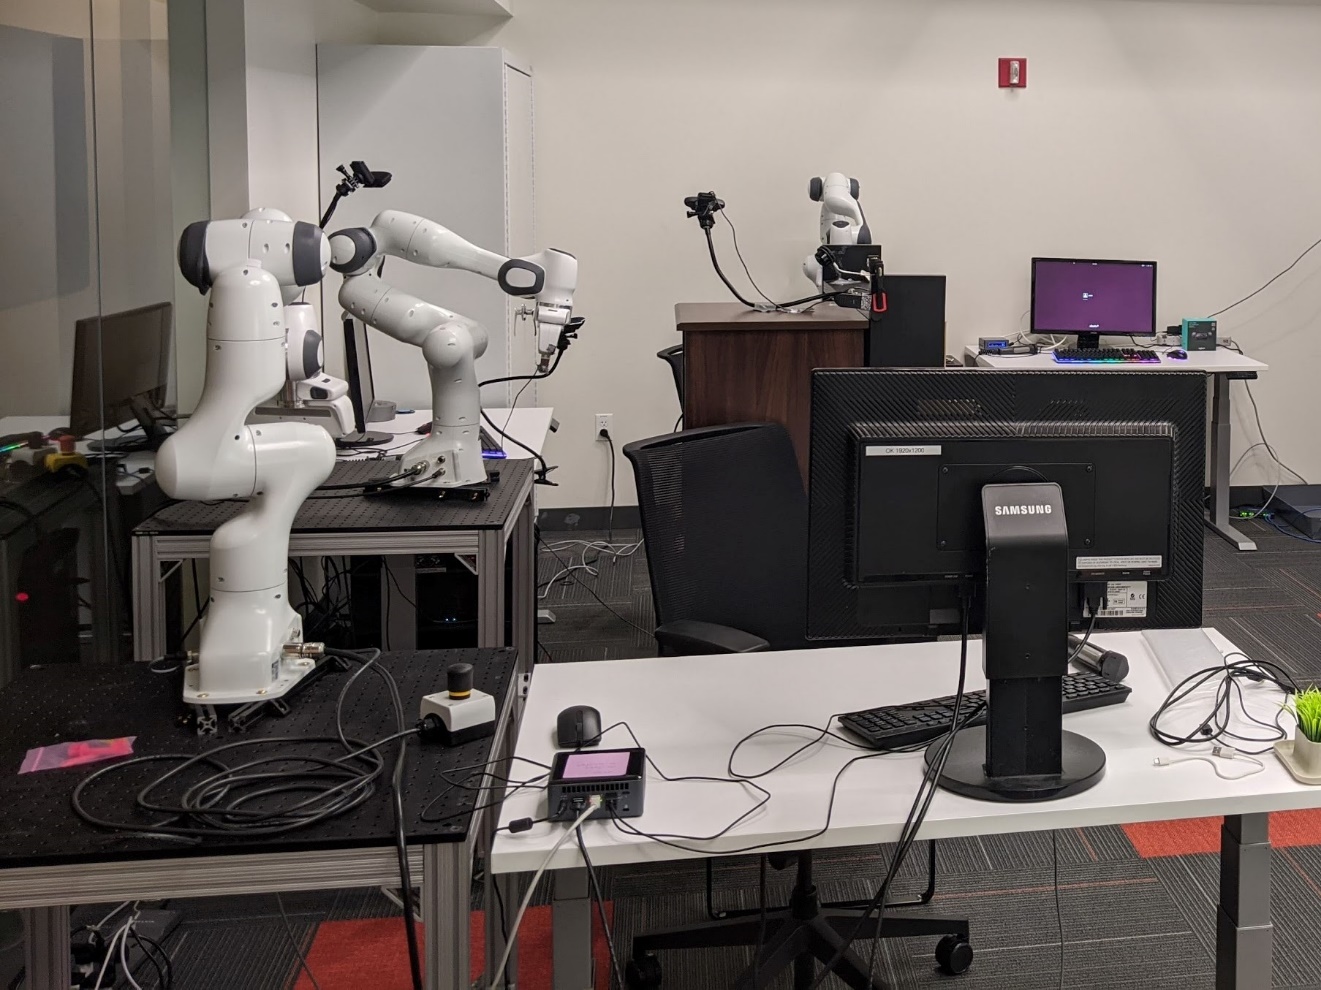 Chelsea Finn’s AI and robotics lab at Stanford University